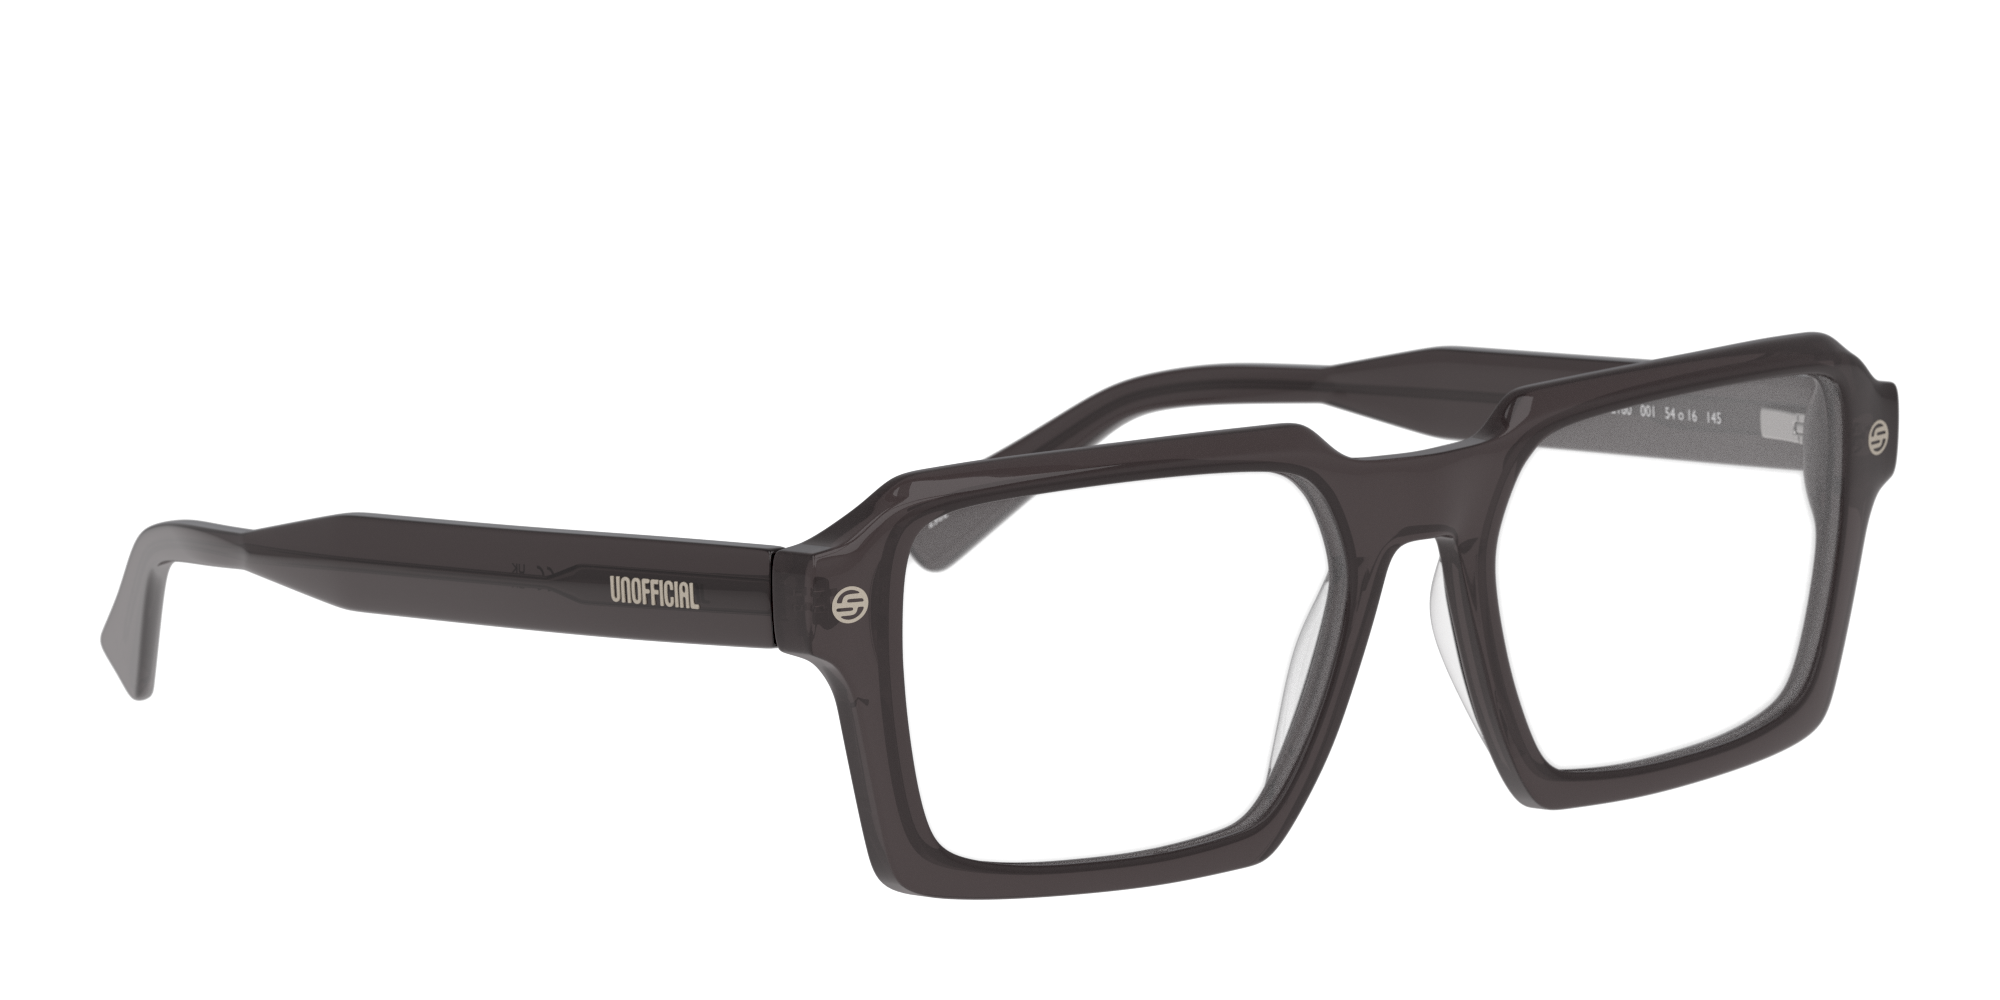 Angle_Right01 Unofficial UO2160 Glasses Transparent / Grey